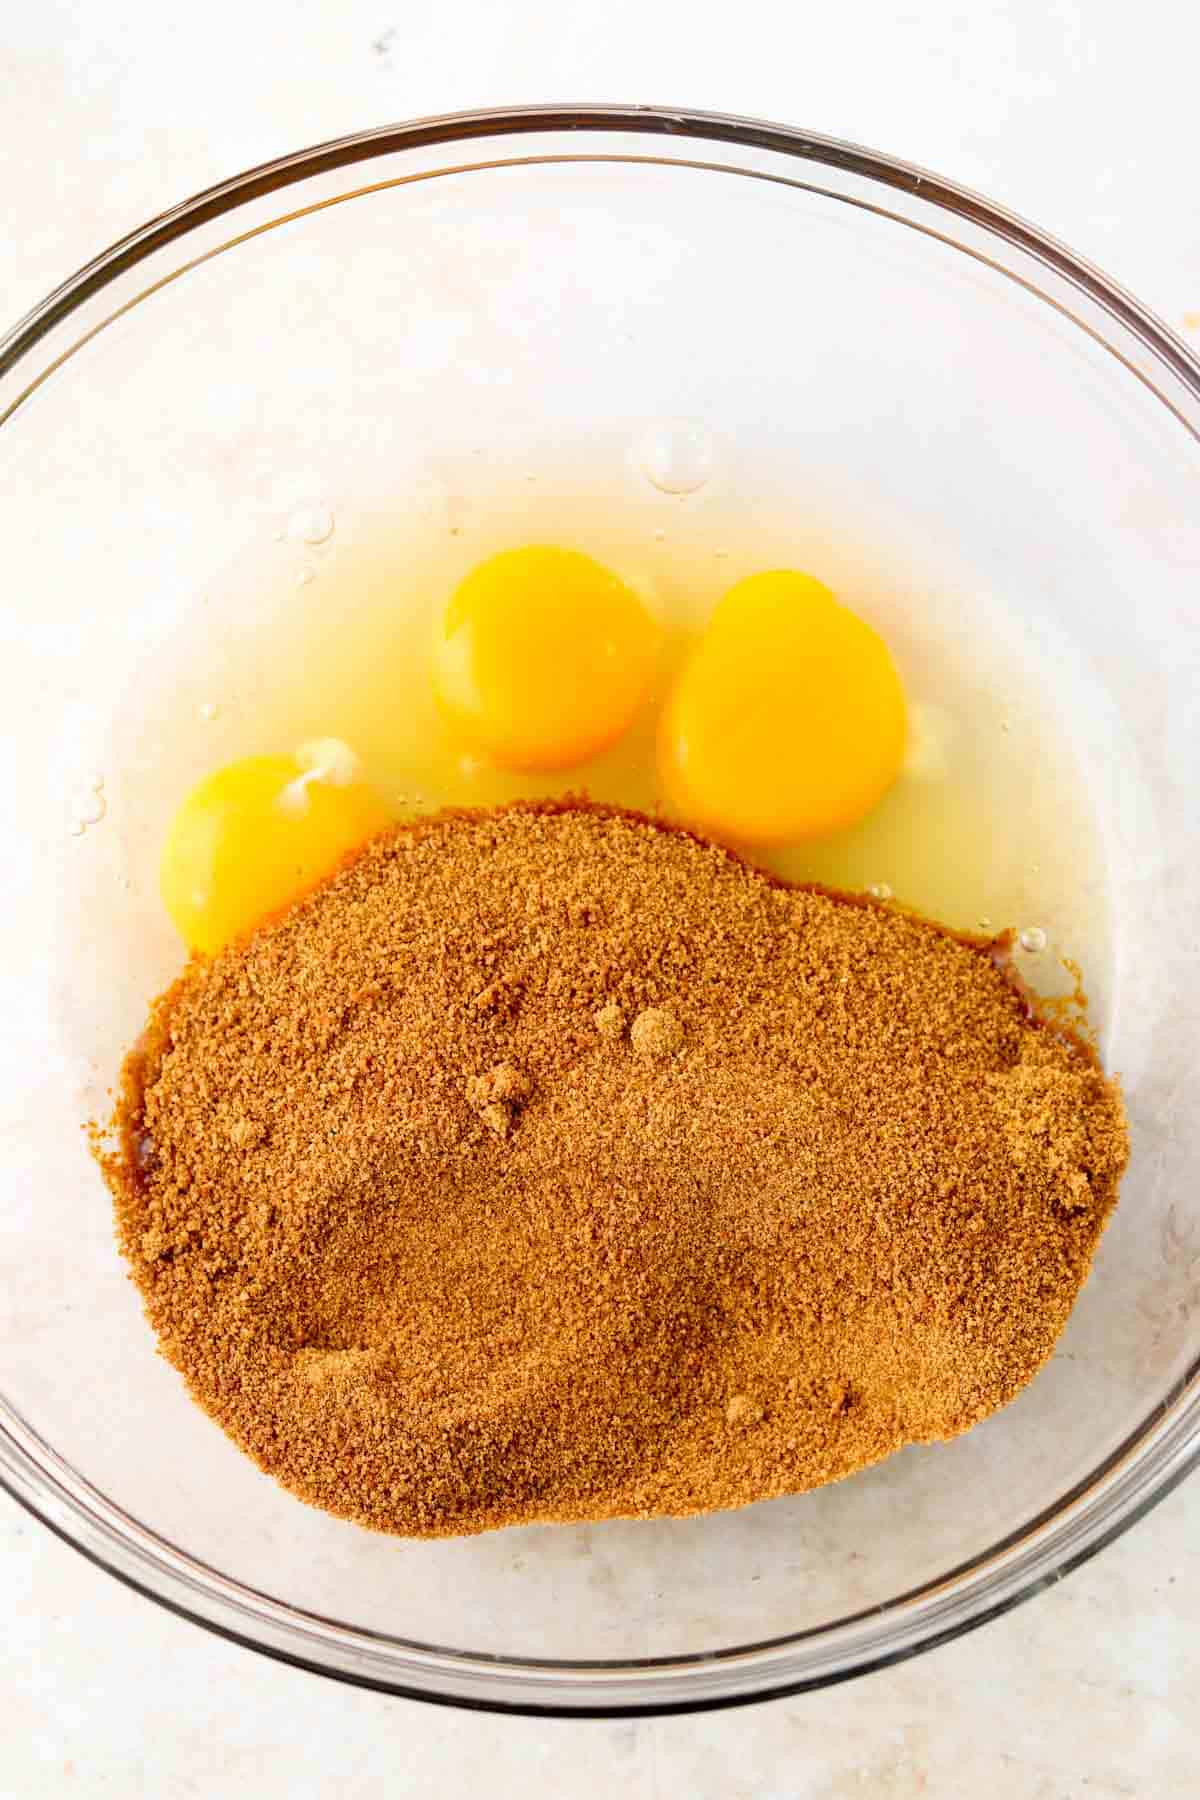 Coconut sugar and eggs in a bowl.